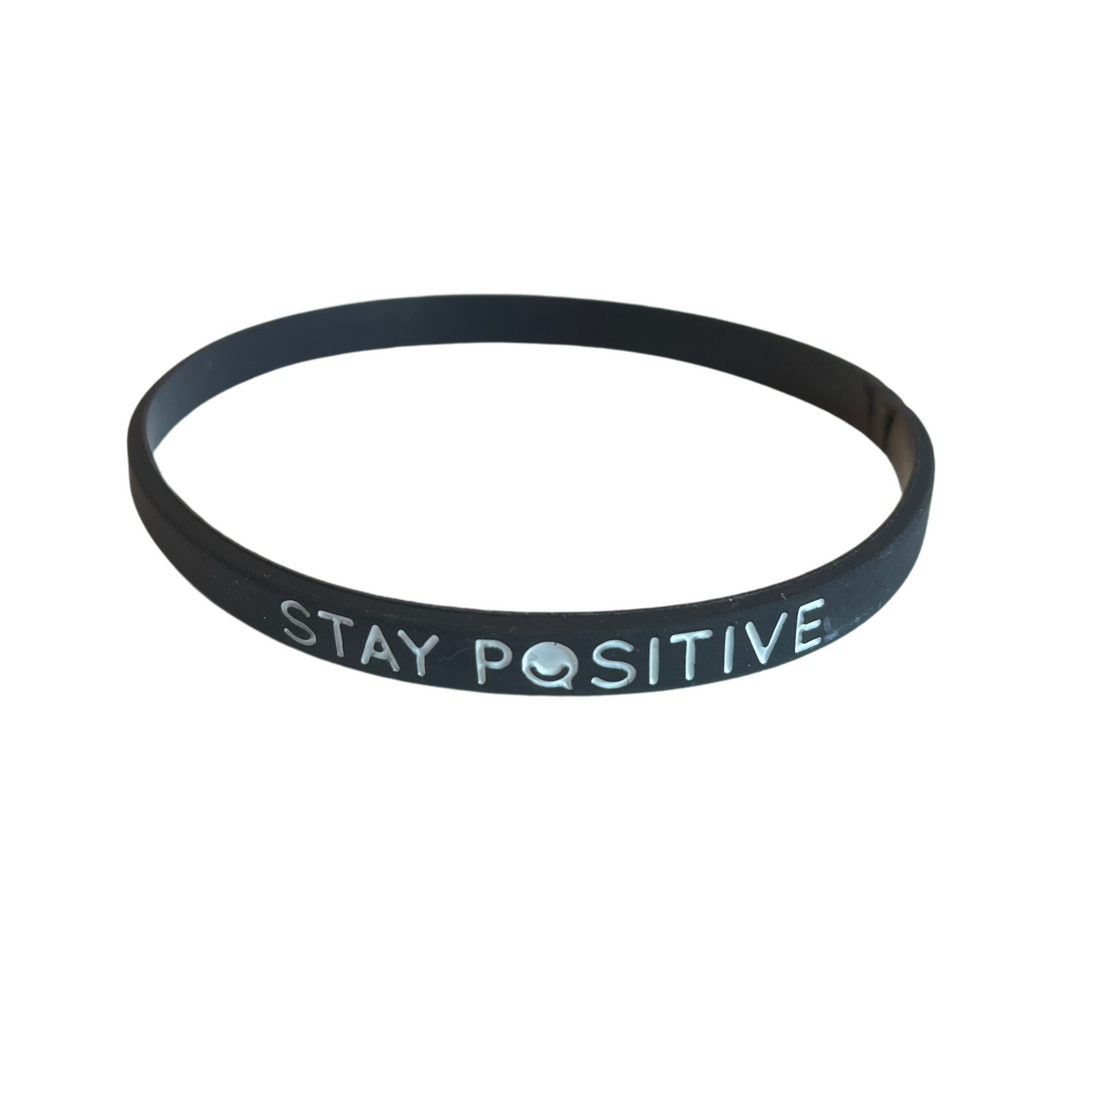 Stay Positive THIN Wristbands (Volume Discount)